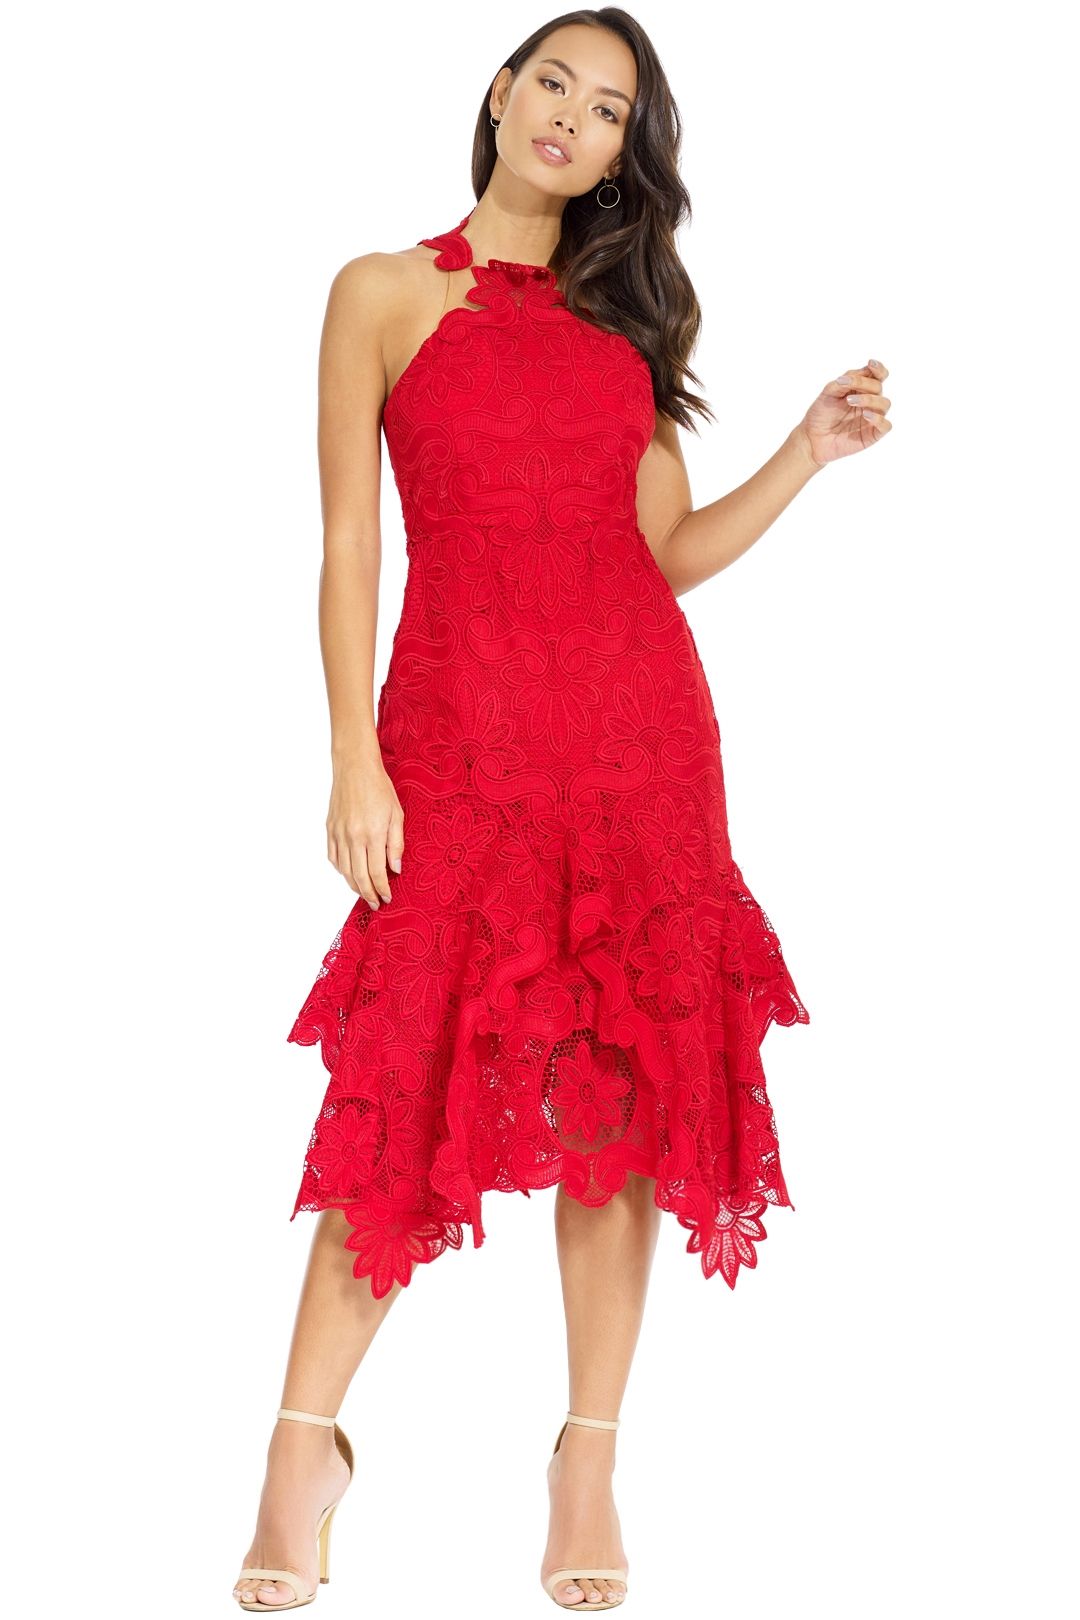 red thurley dress